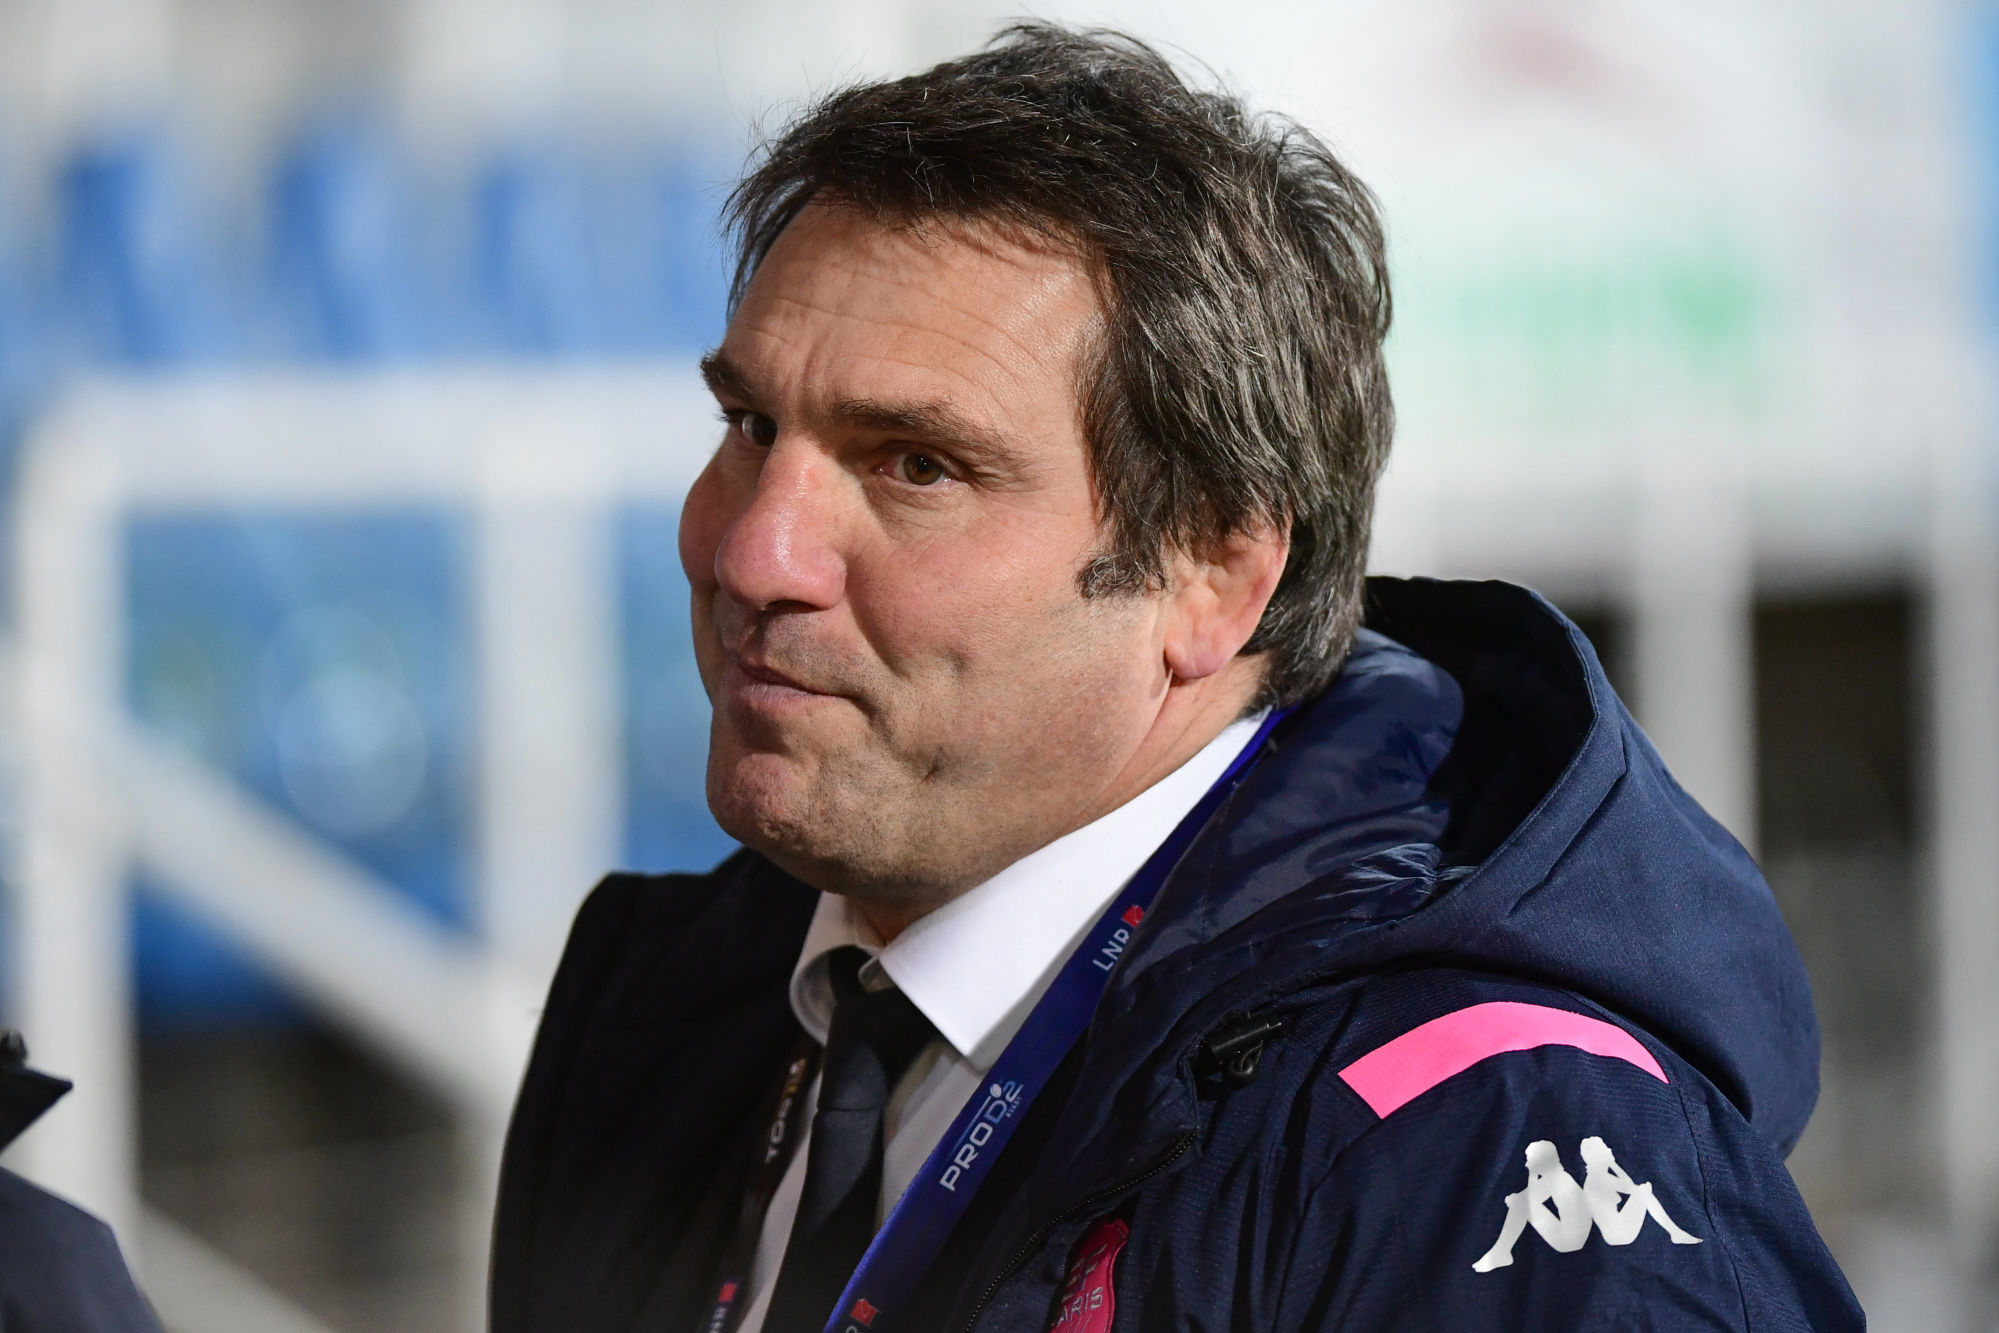 Stade Francais Paris sporting director Fabrice LANDREAU during the Top 14 match between ASM Clermont Auvergne and Stade Francais Paris on January 25, 2020 in Clermont-Ferrand, France. (Photo by Dave Winter/Icon Sport) - Fabrice LANDREAU - Stade Marcel Michelin - Clermont Ferrand (France)